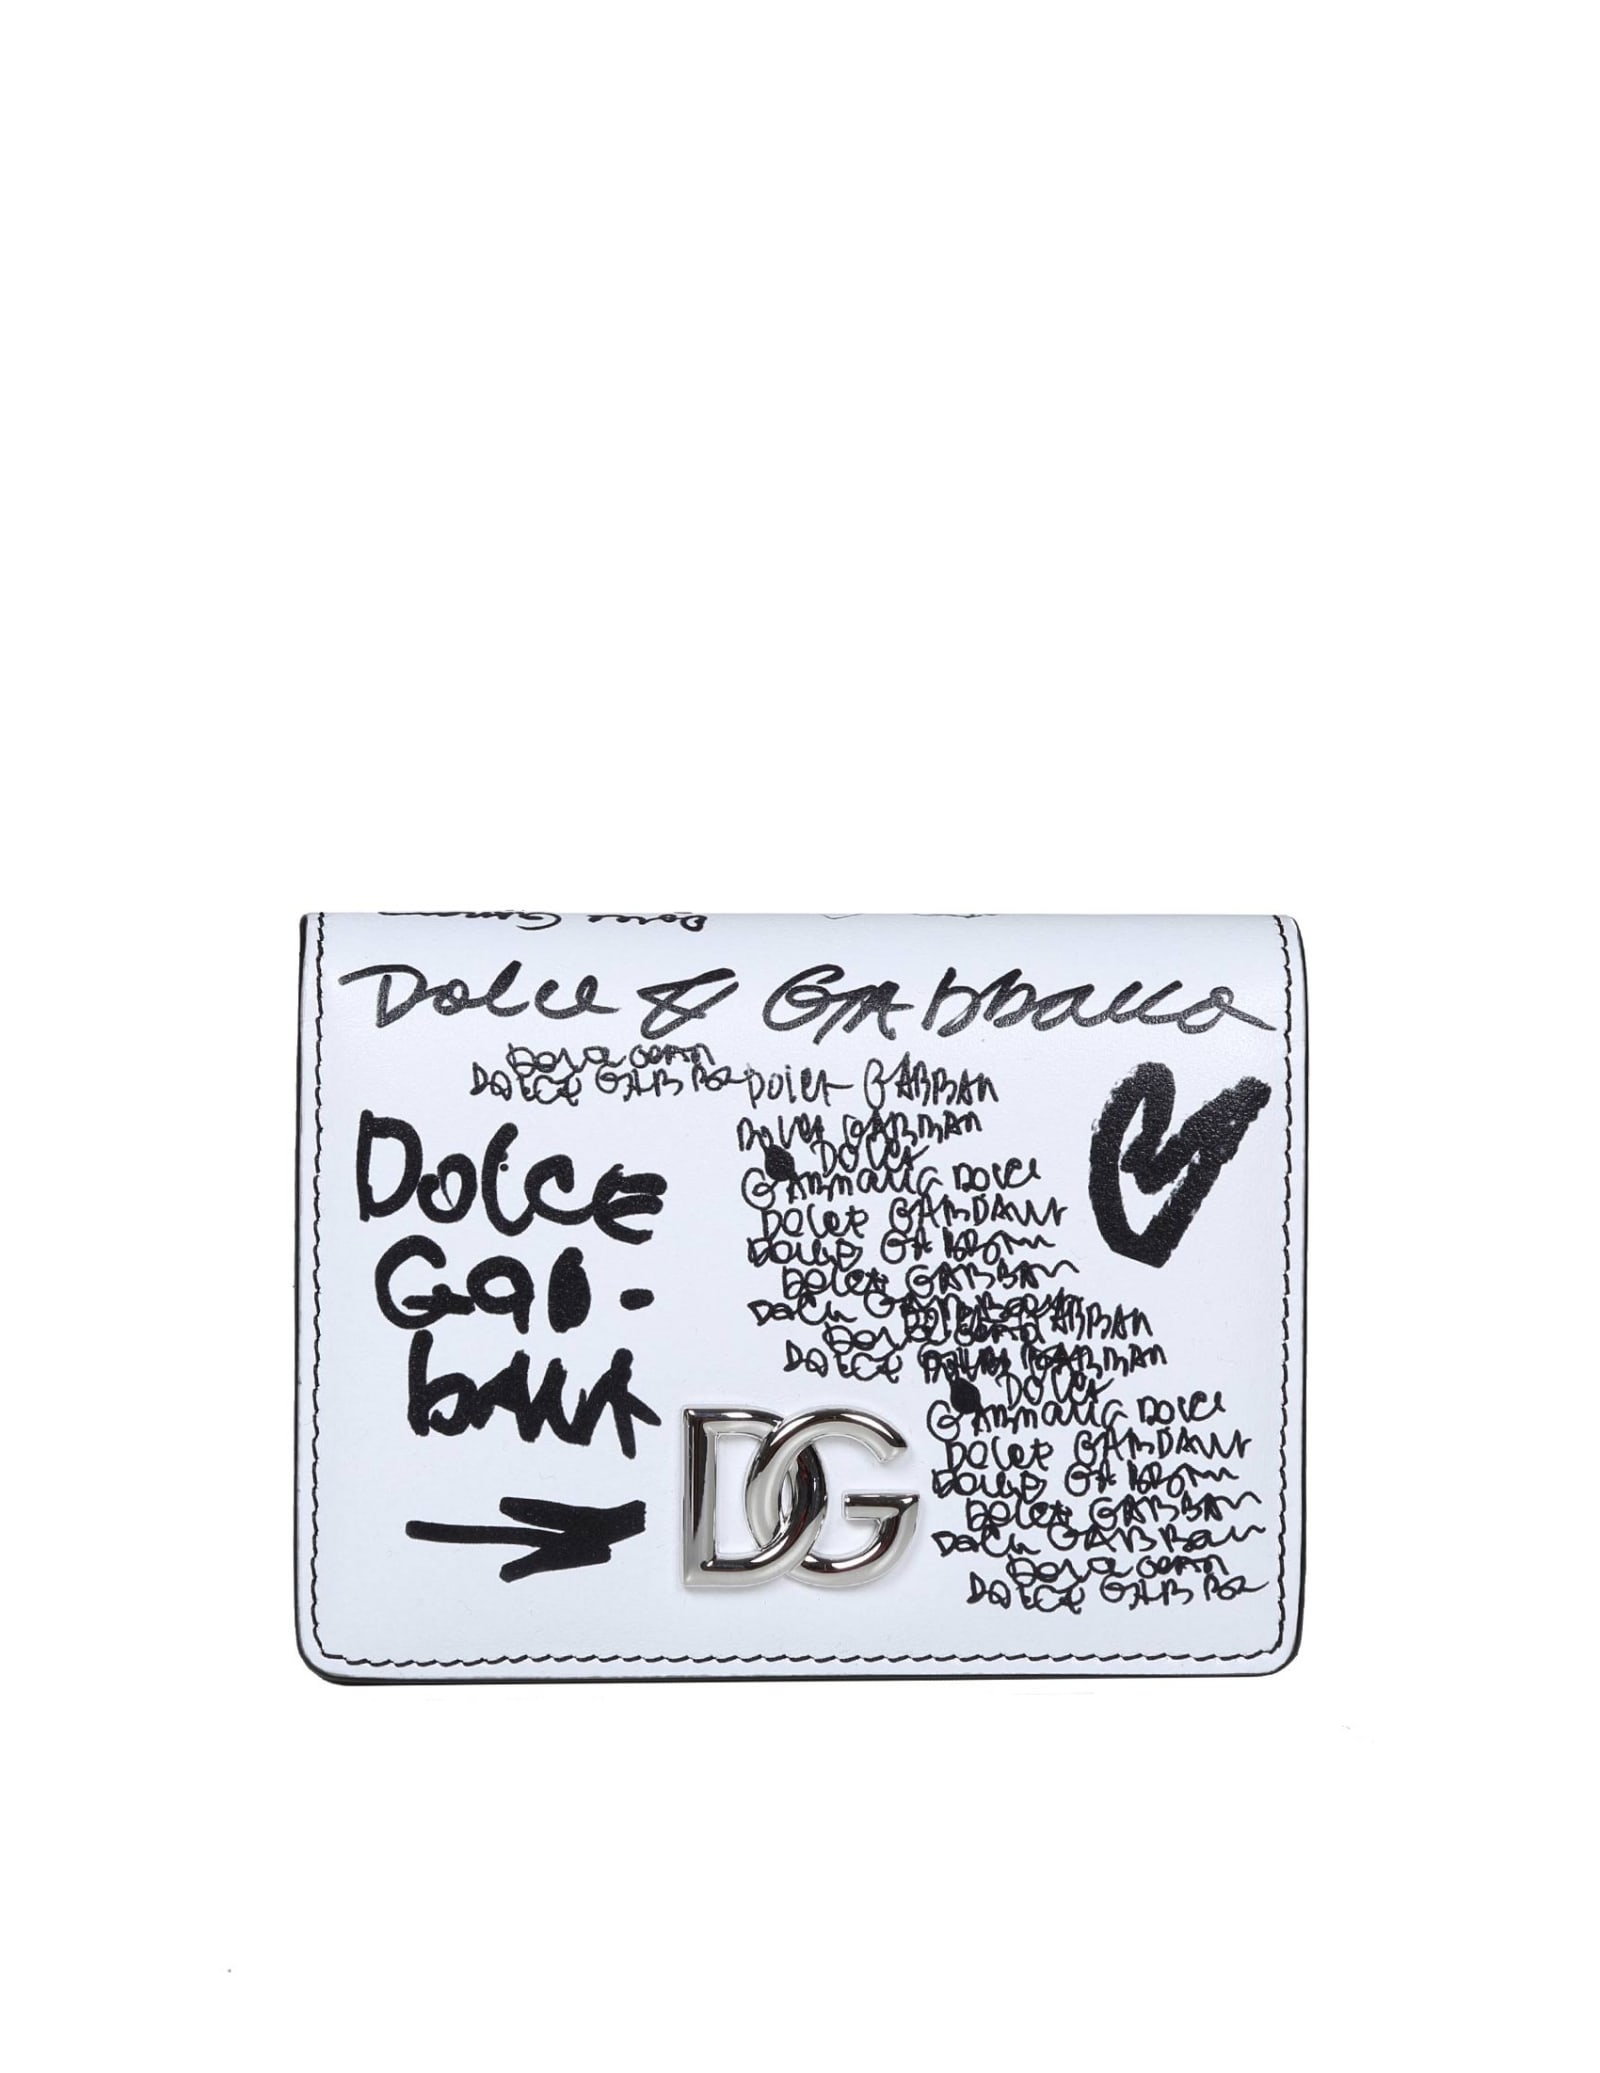 Dolce & Gabbana Leather Wallet With Graffiti Print